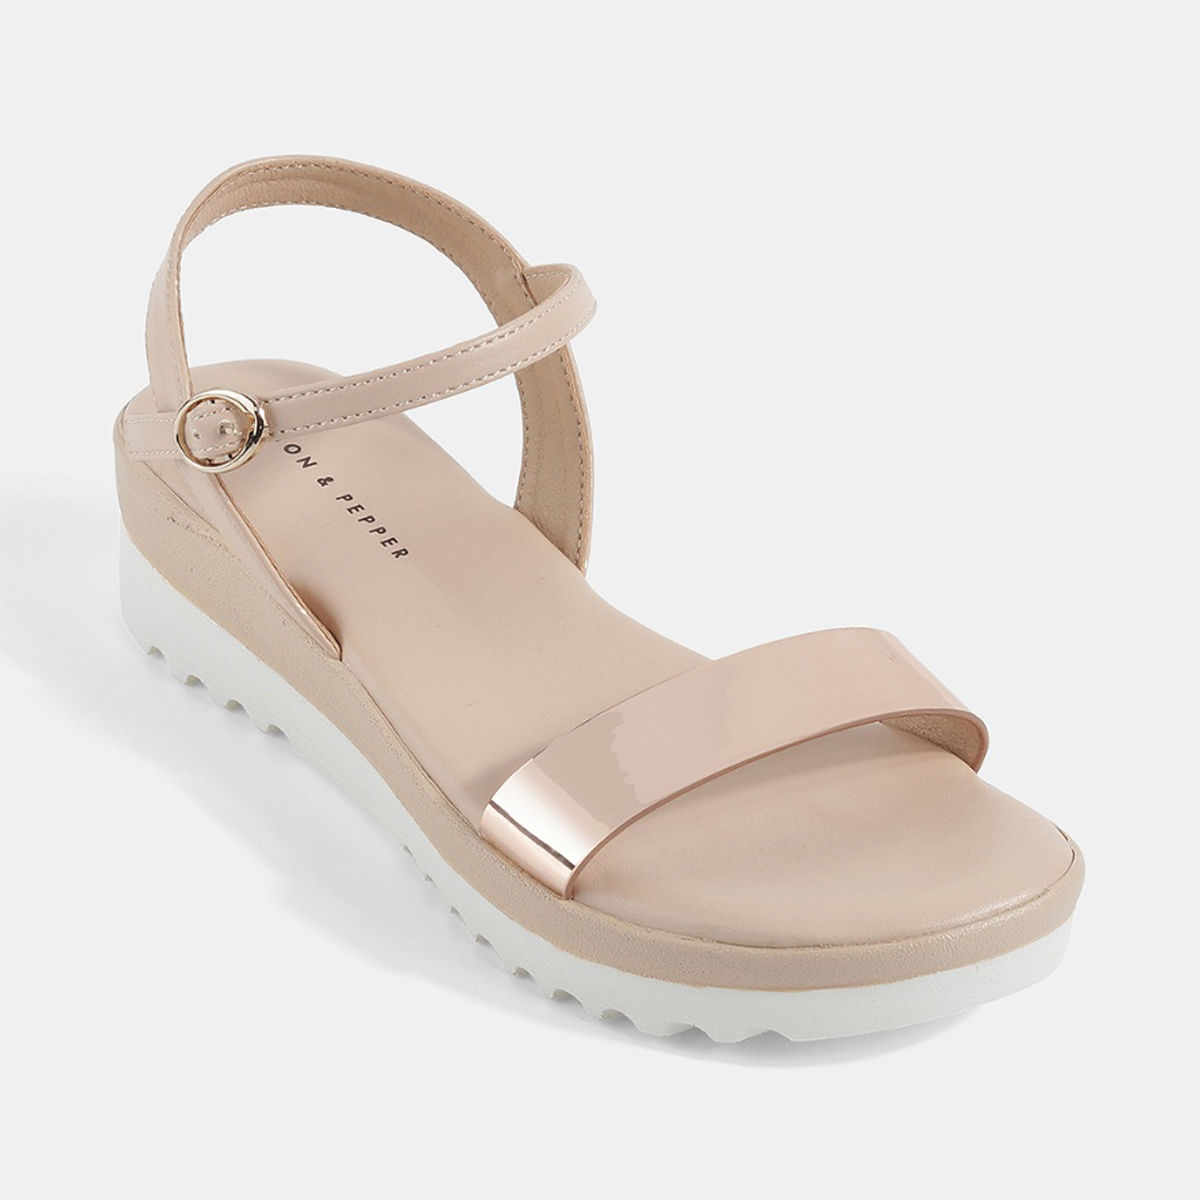 Lemon & Pepper Rose Gold Casual Sandals: Buy Lemon Pepper Rose Gold Casual Sandals Online at Best Price in India | Nykaa